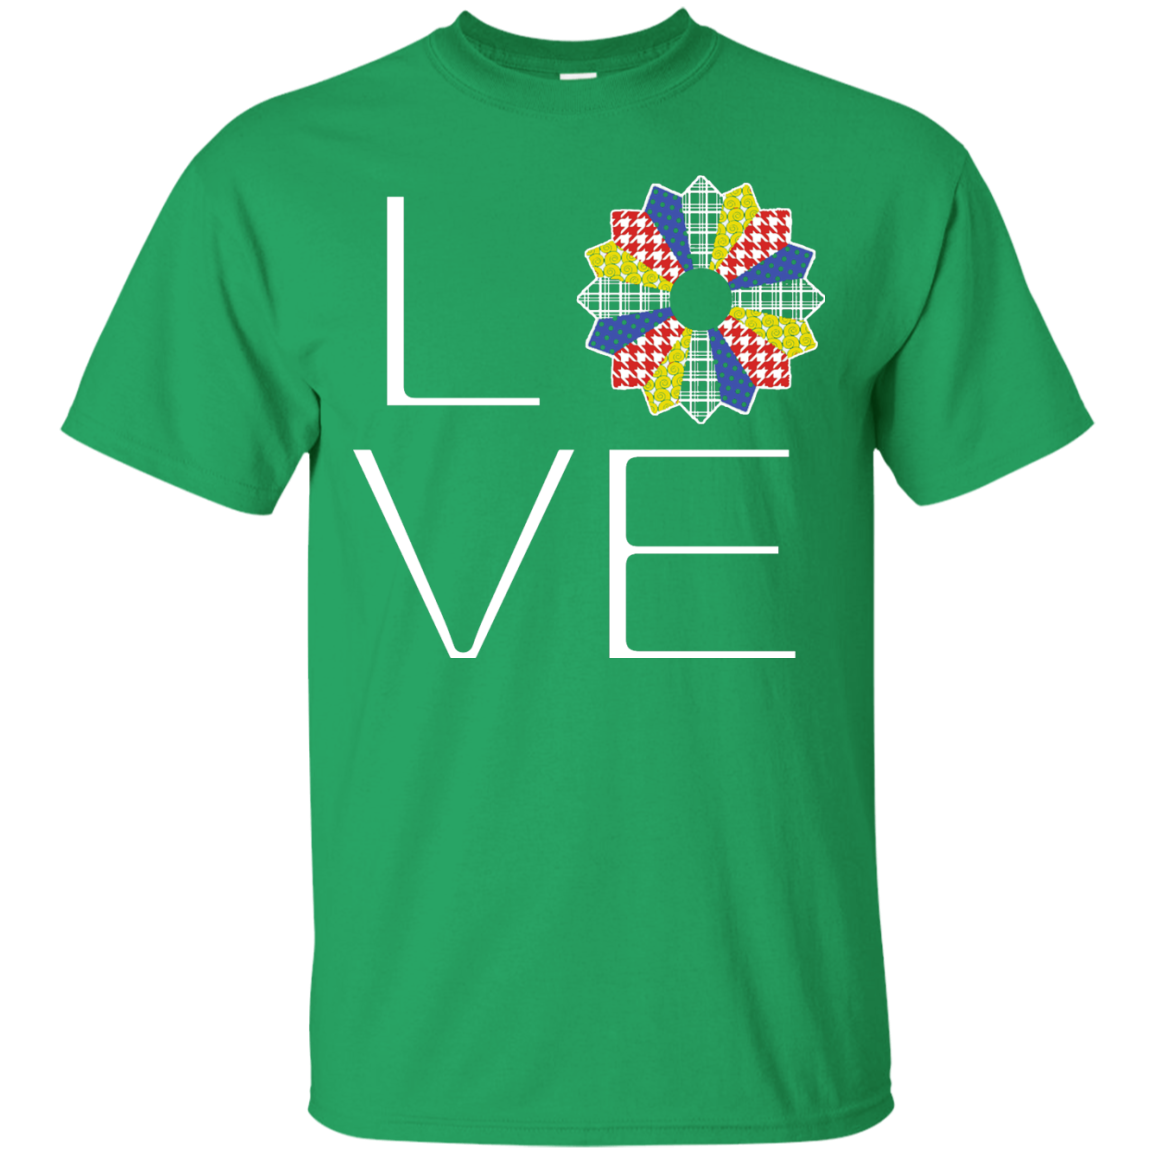 LOVE Quilting (Primary Colors) Custom Ultra Cotton T-Shirt - Crafter4Life - 2